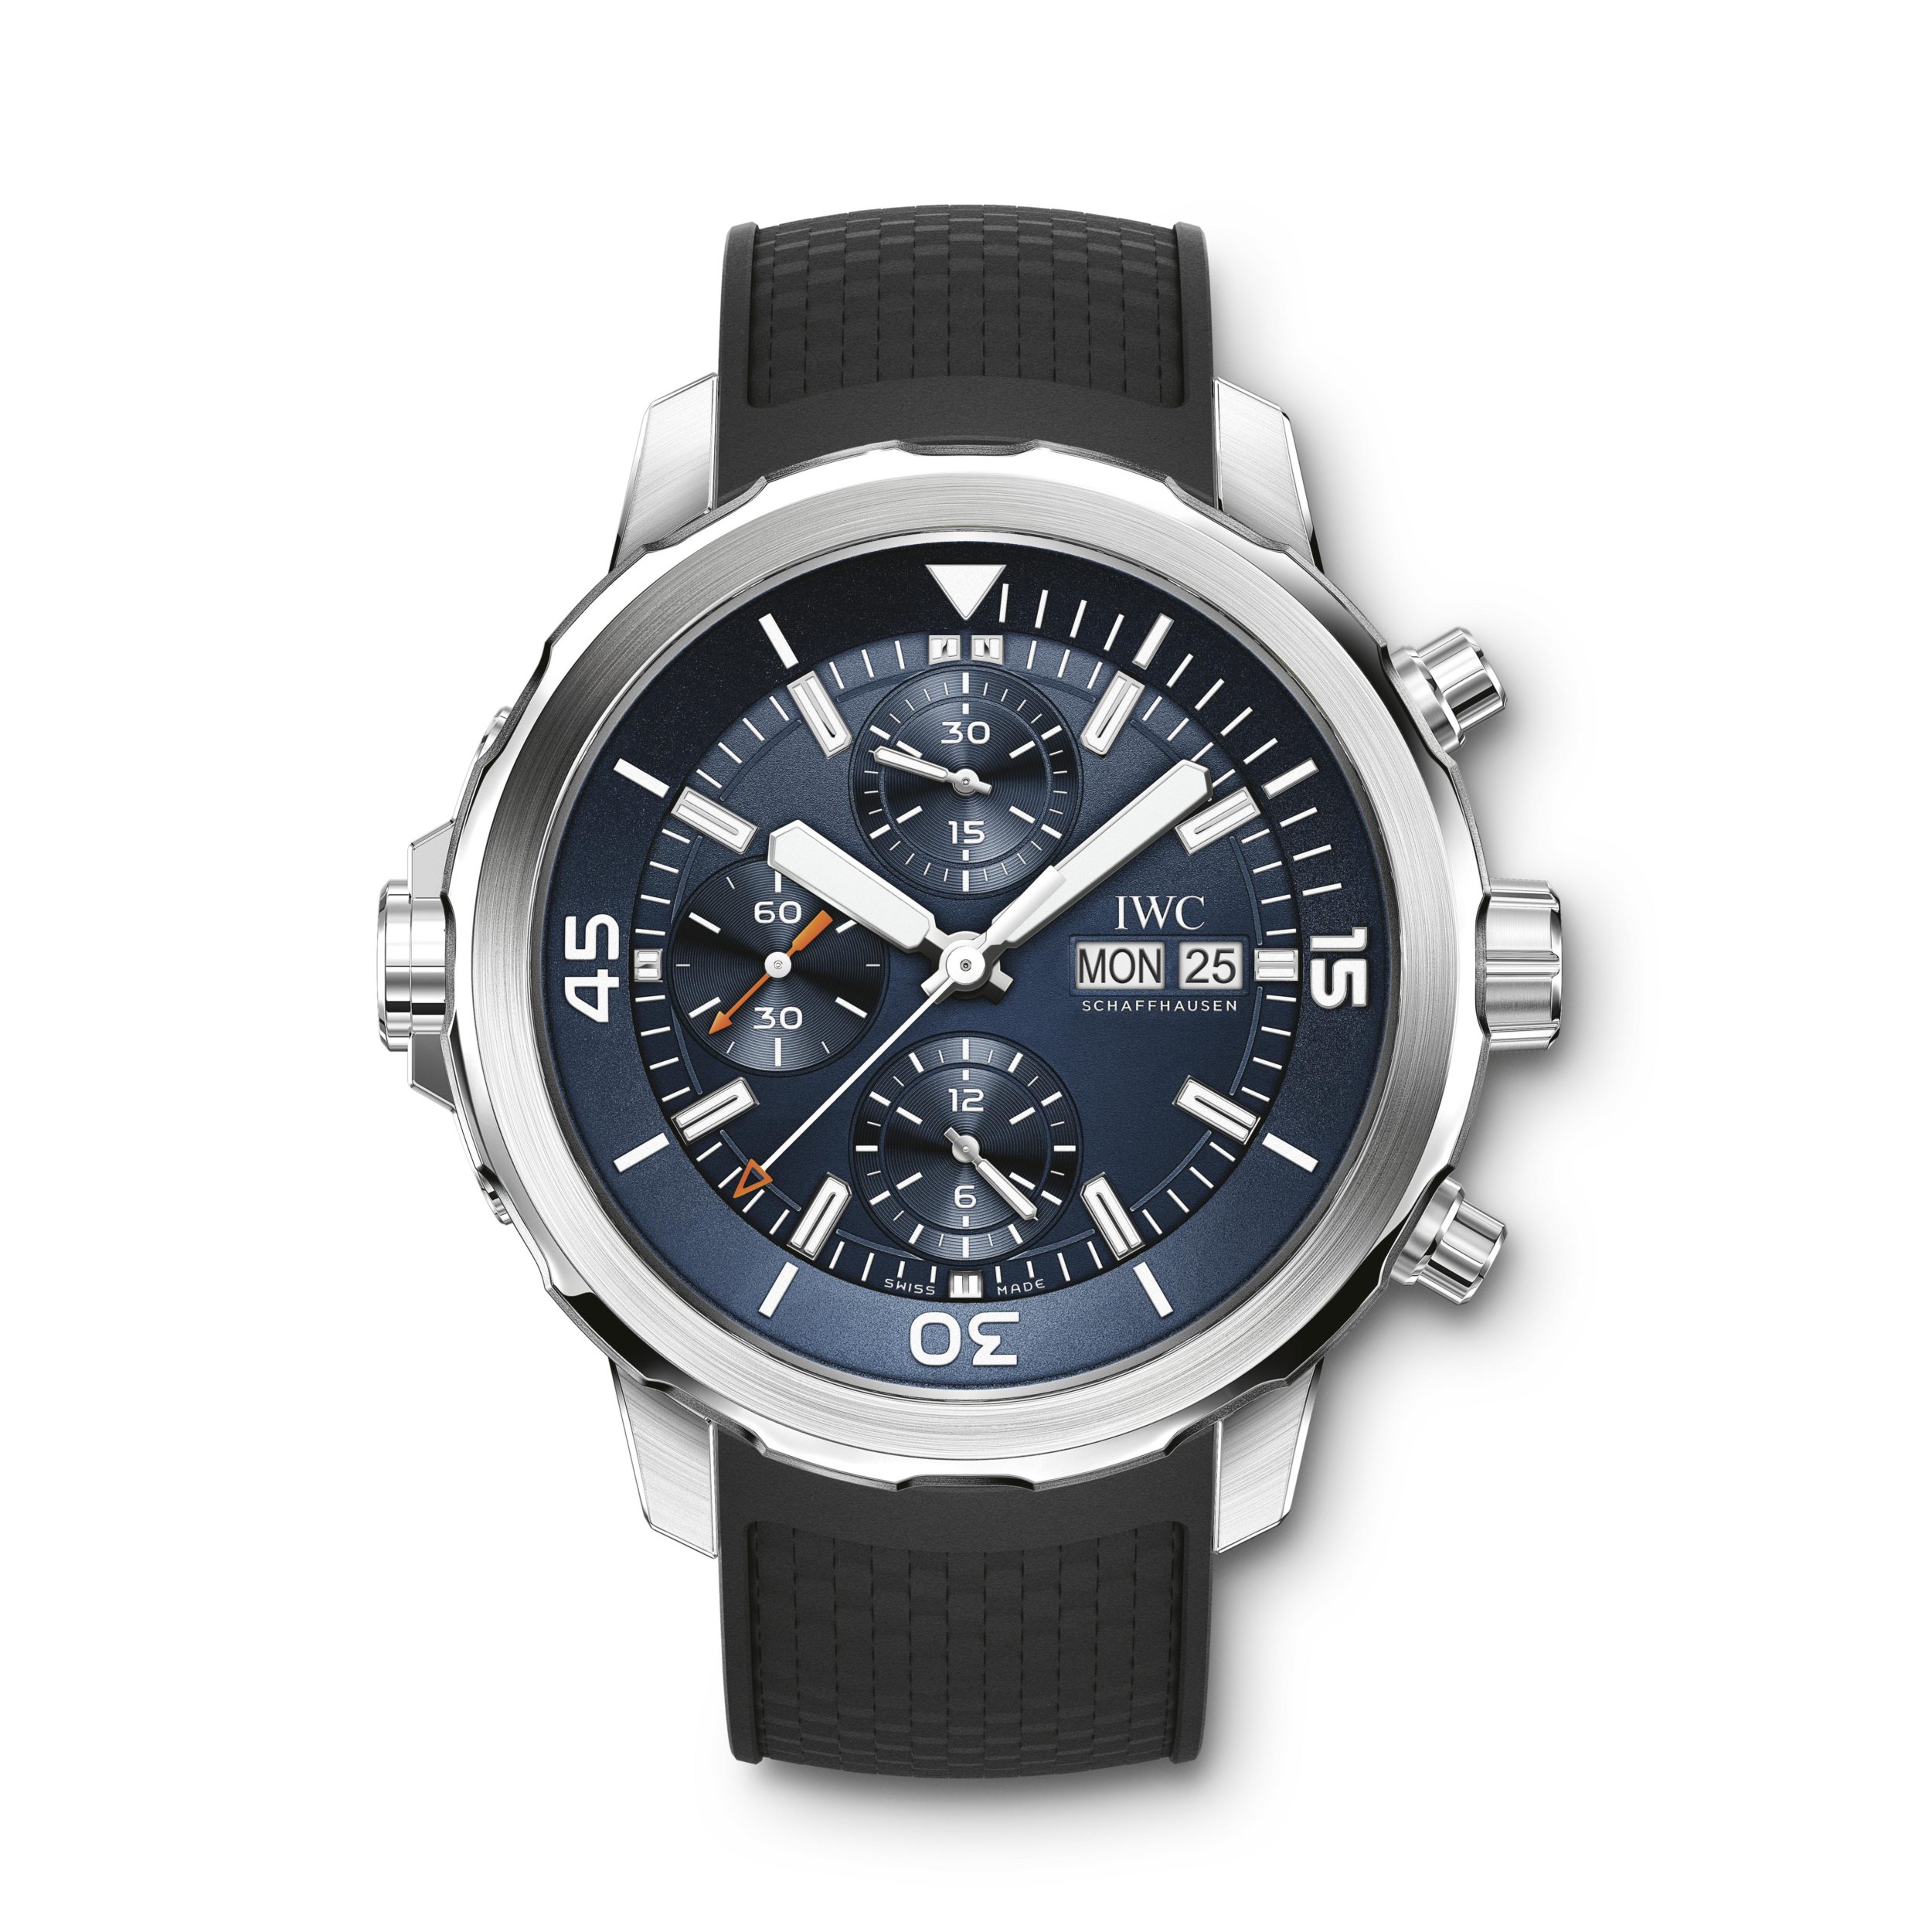 IW376805 Aquatimer Chronograph Edition Expedition Jacques-Yves Cousteau 